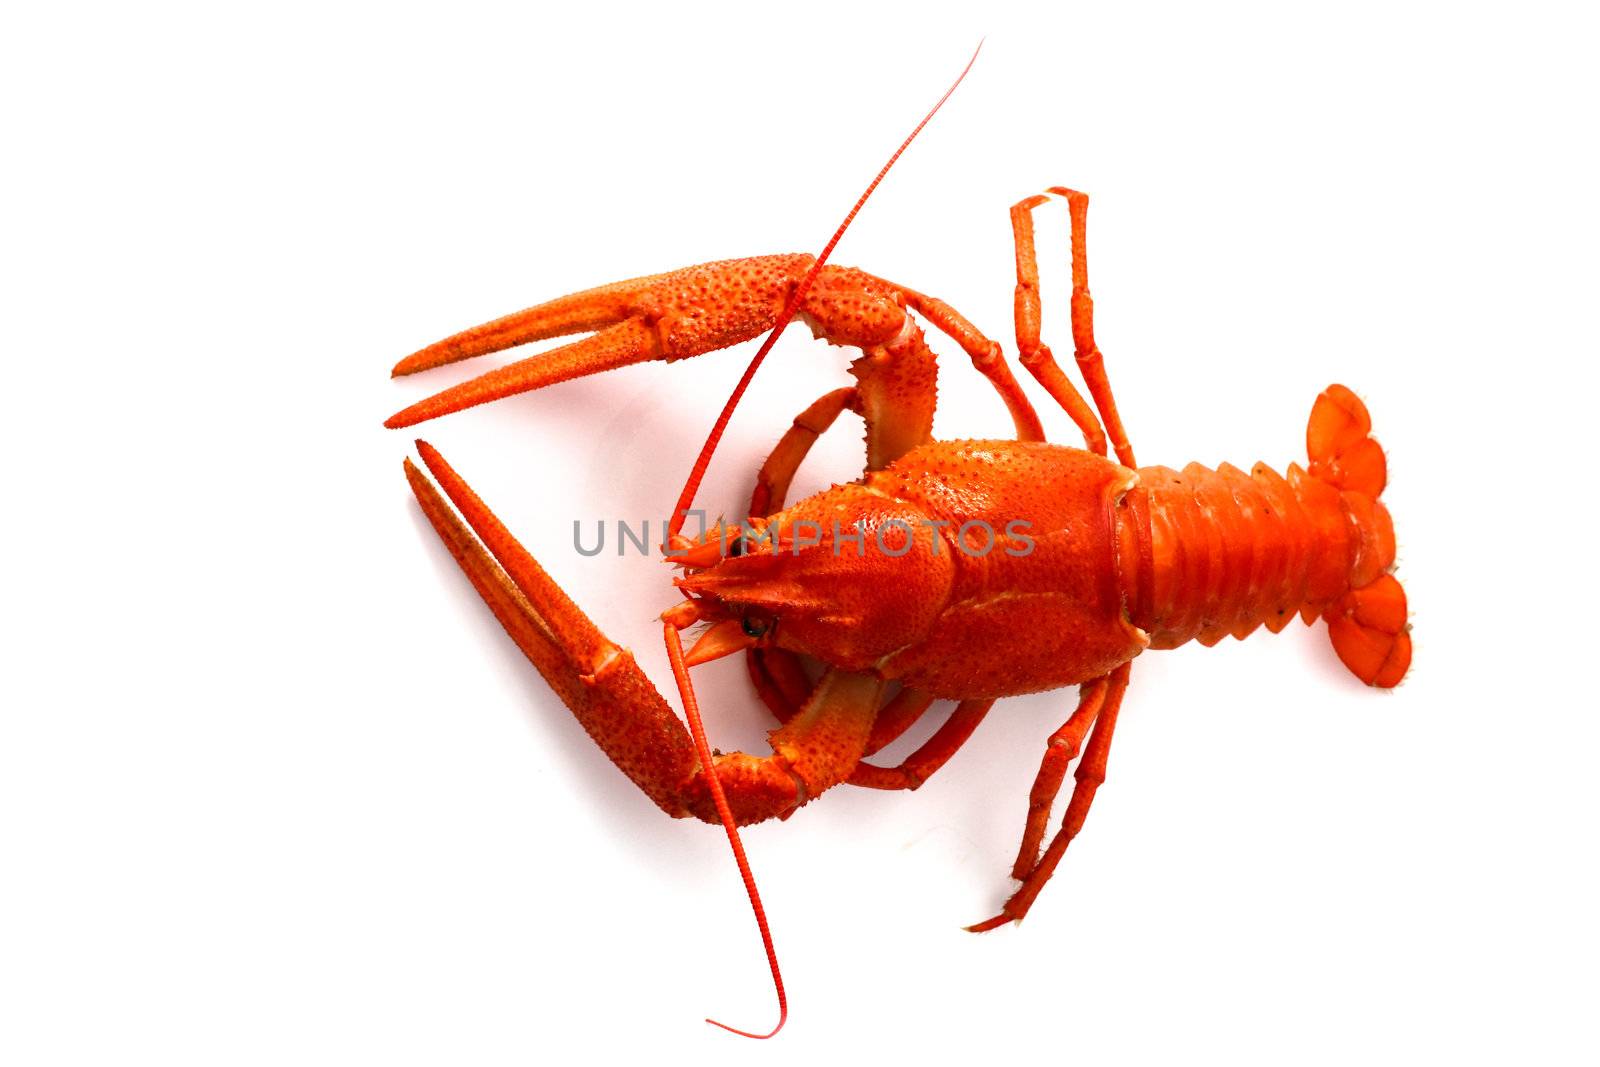 An image of cooked red lobster over white